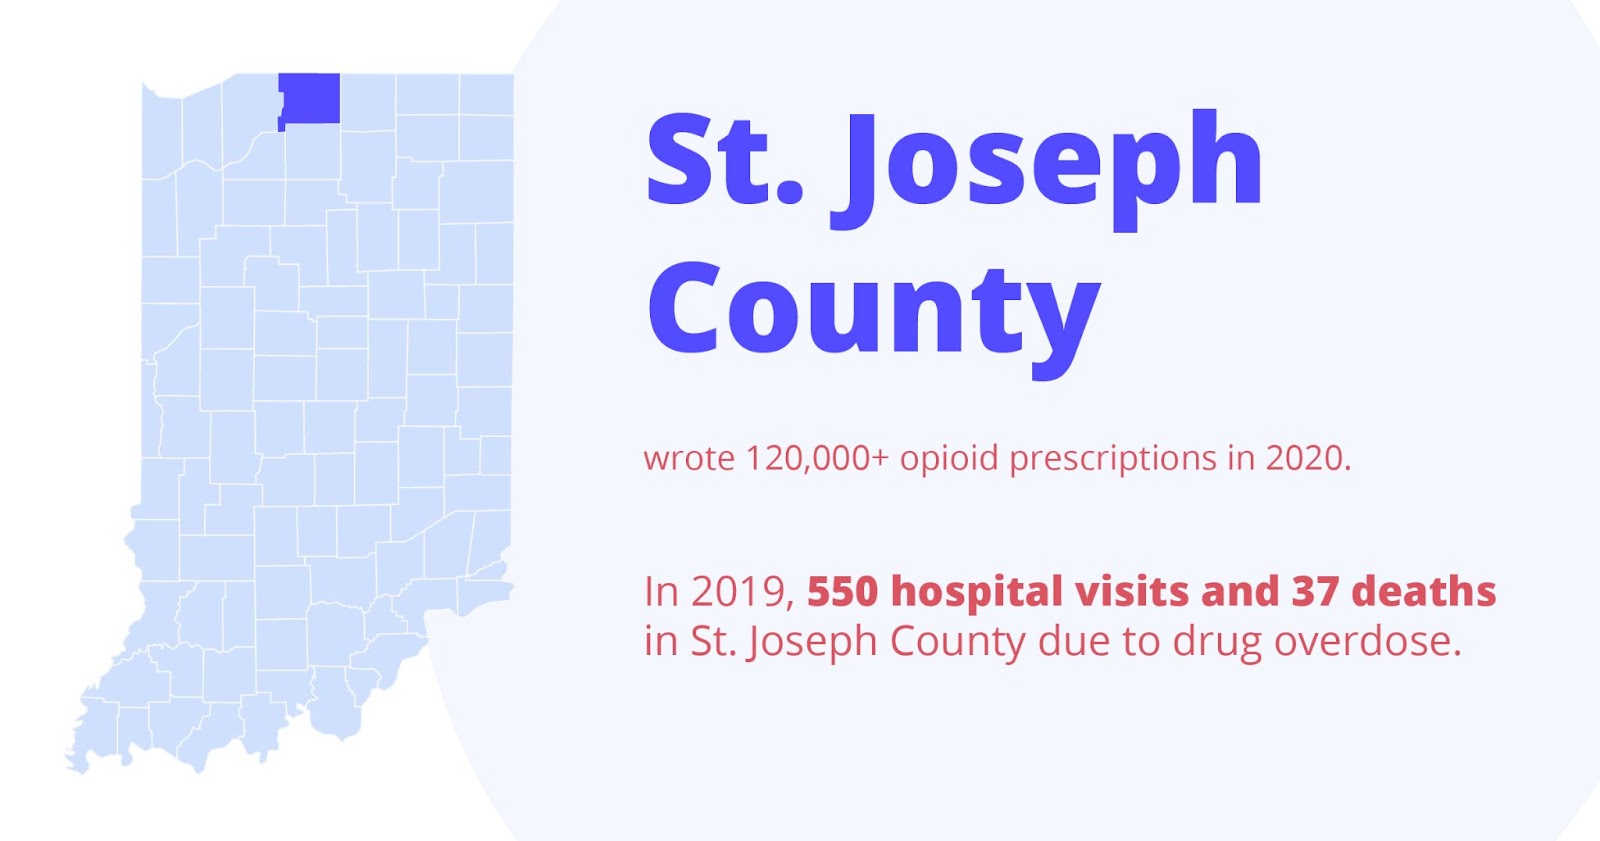 St. Joseph county wrote 120,000+ opioid prescriptions in 2020. In 2019, 550 hospital visits and 37 deaths in St. Joseph county due to drug overdose. South Bend Treatment for Drug Addiction or Alcoholism